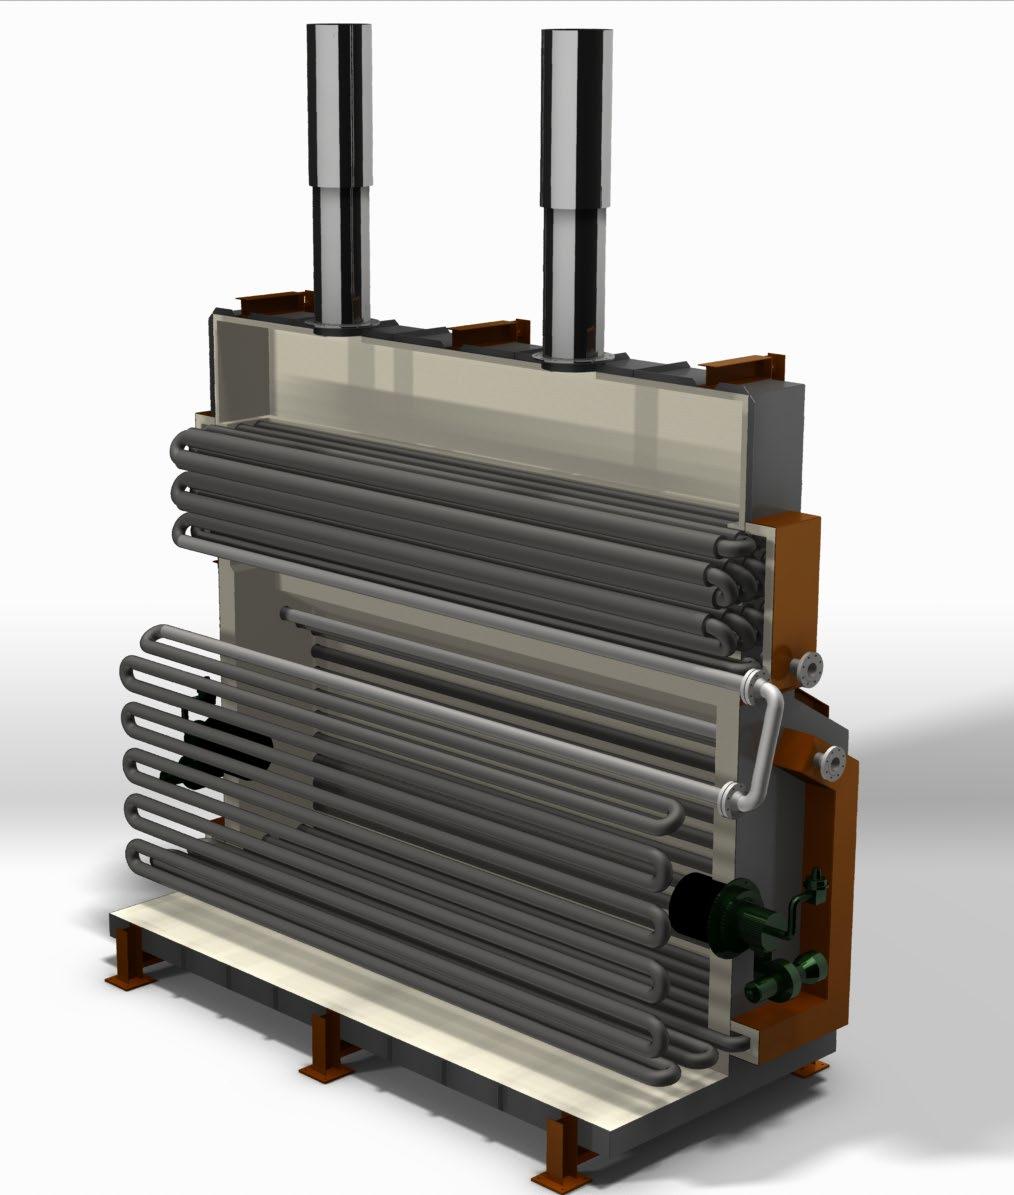 HEATING SYSTEM: Direct Fired Radiant- Convective HOW IT WORKS: The heater in this system uses a radiant section with generous tube spacing, combined with a separate serpentine fin tube convection